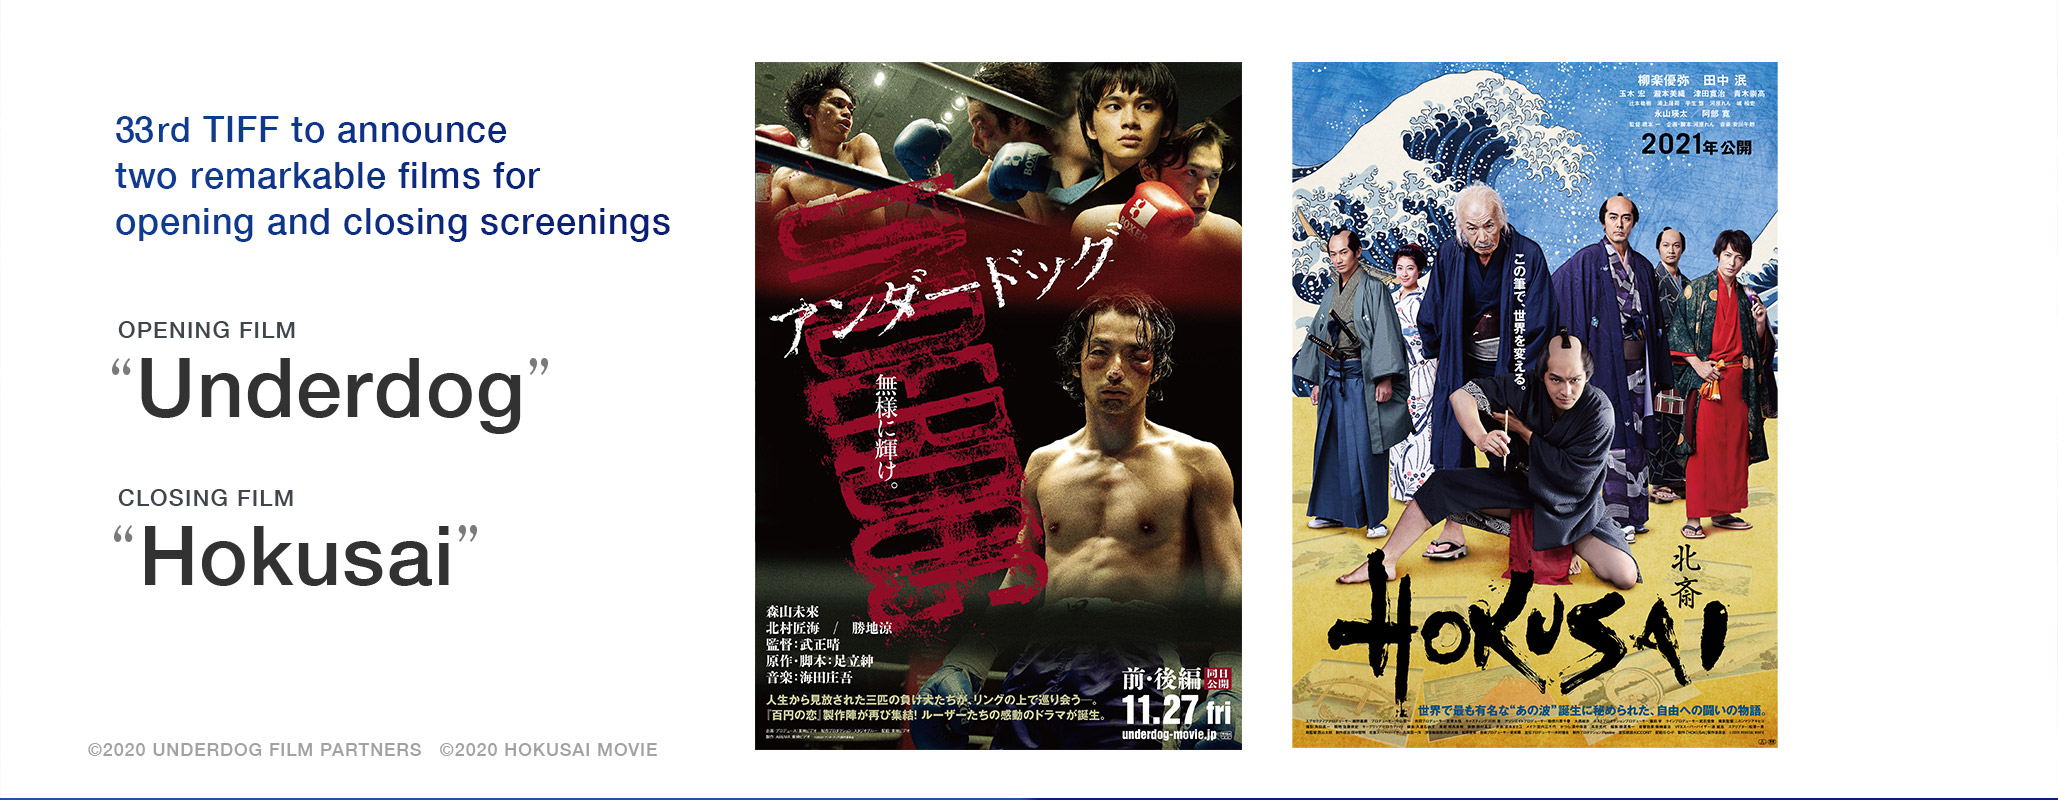 33rd TIFF to Open with “Underdog” and Close with “Hokusai” 